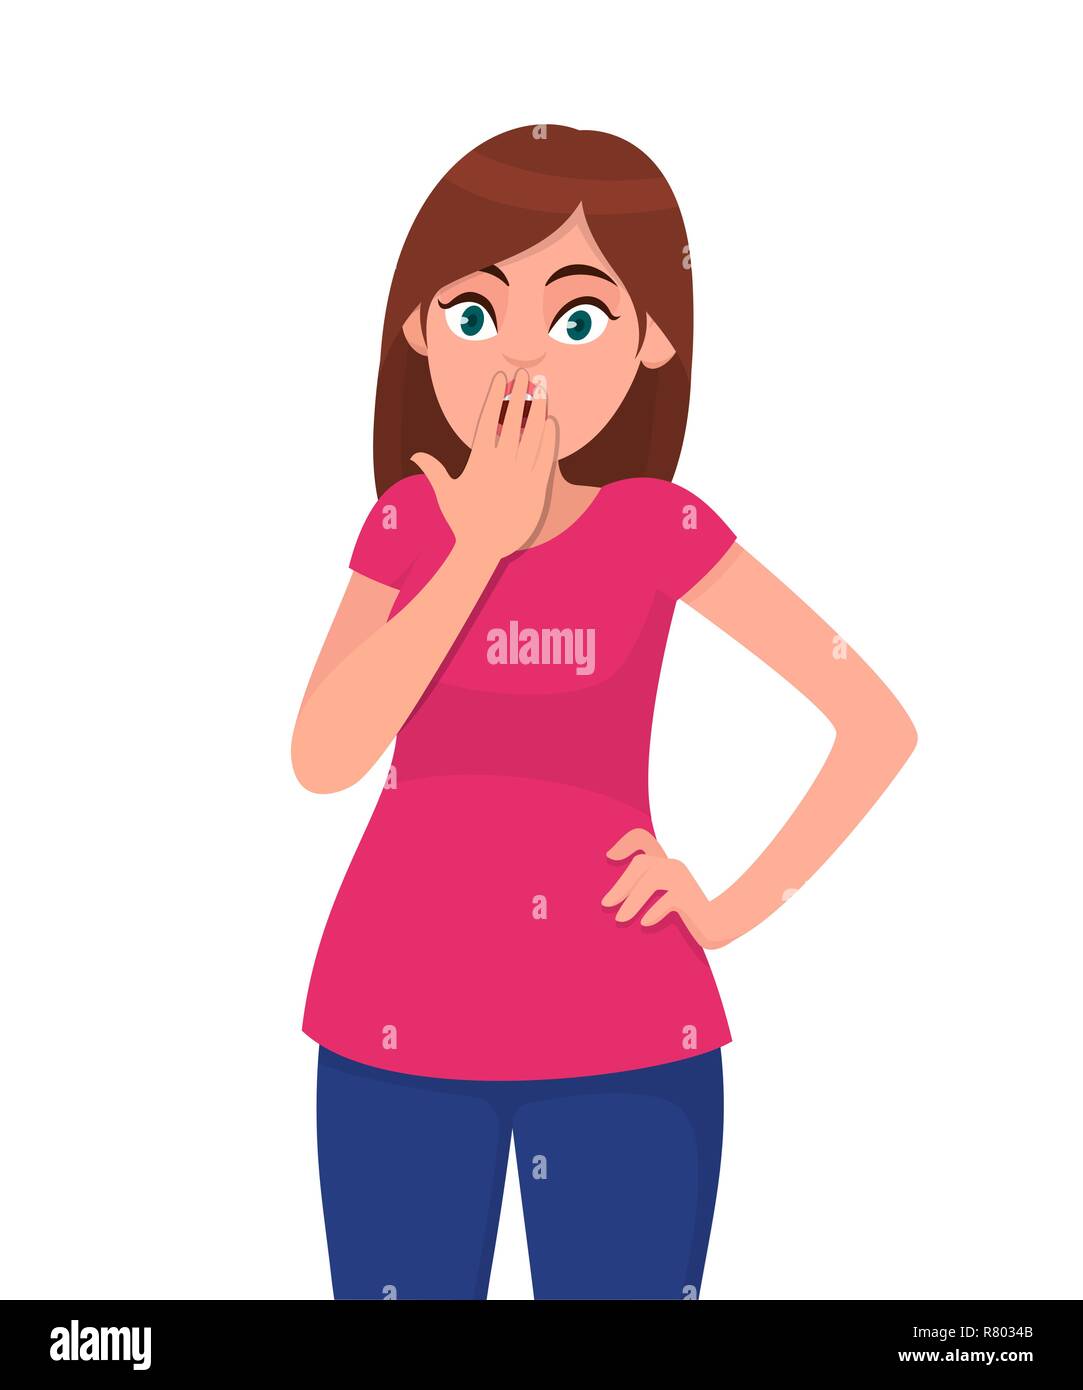 Shocked young woman closed mouth with hand while eyes open widely. Woman covering mouth with hand. Human emotion and body language concept. Stock Vector